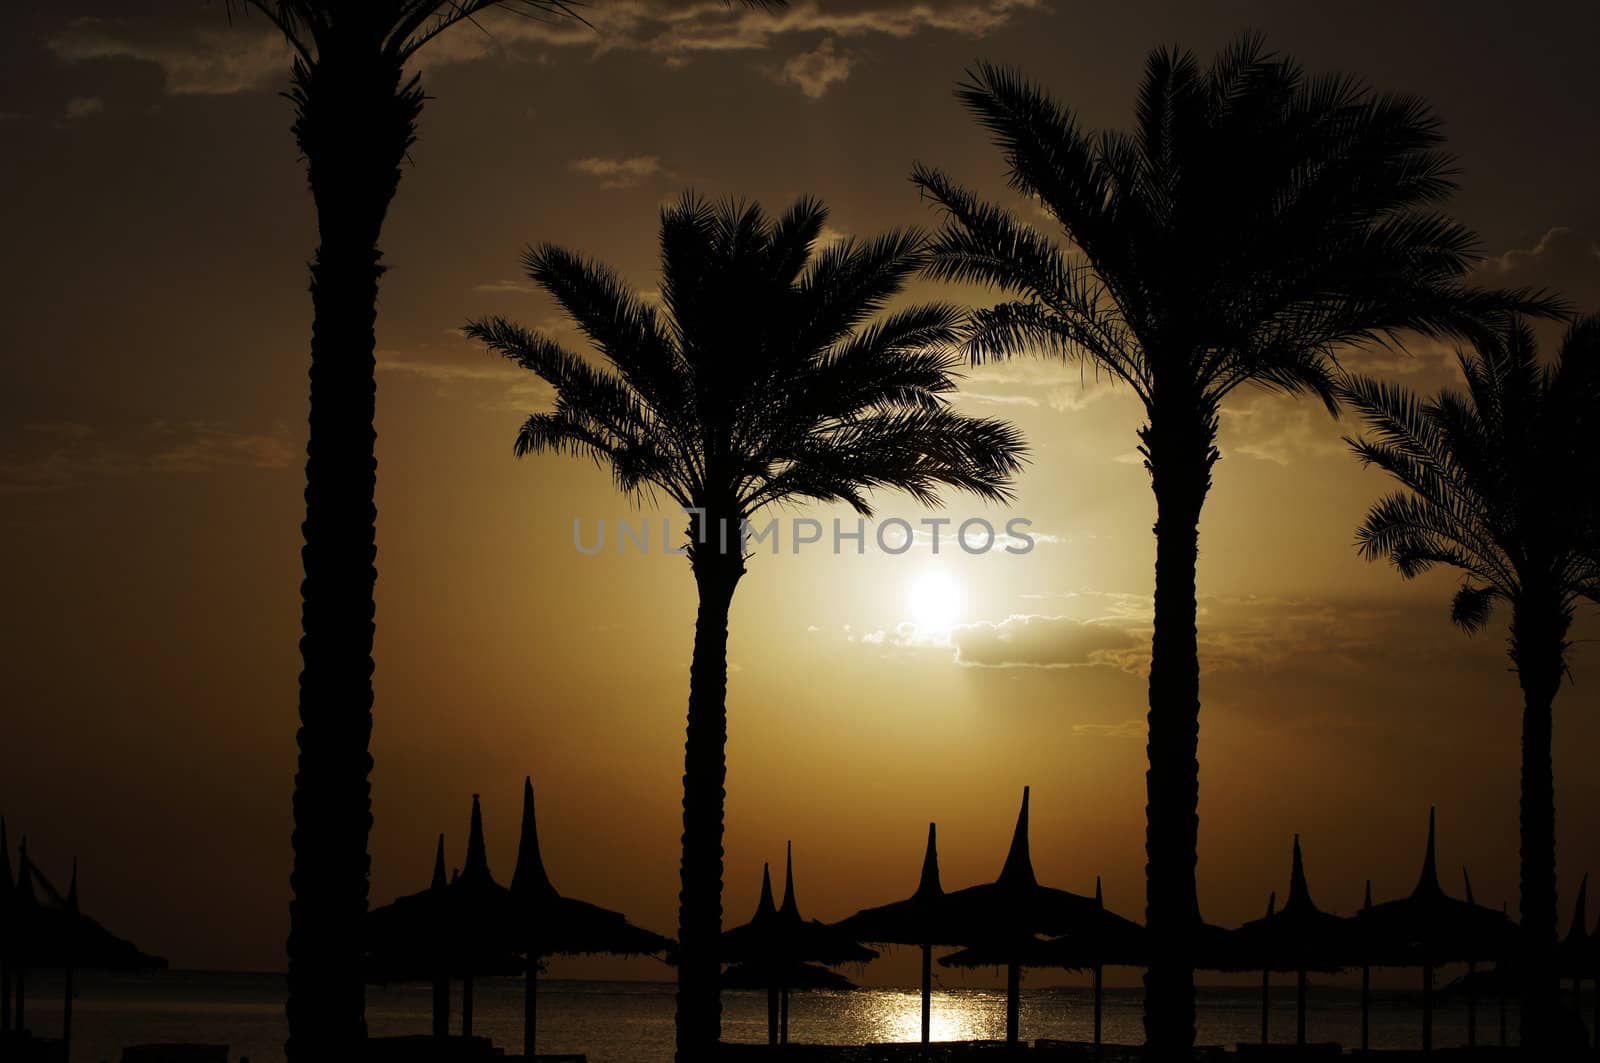 Sunrise over the Red sea egyptian coast by Elet